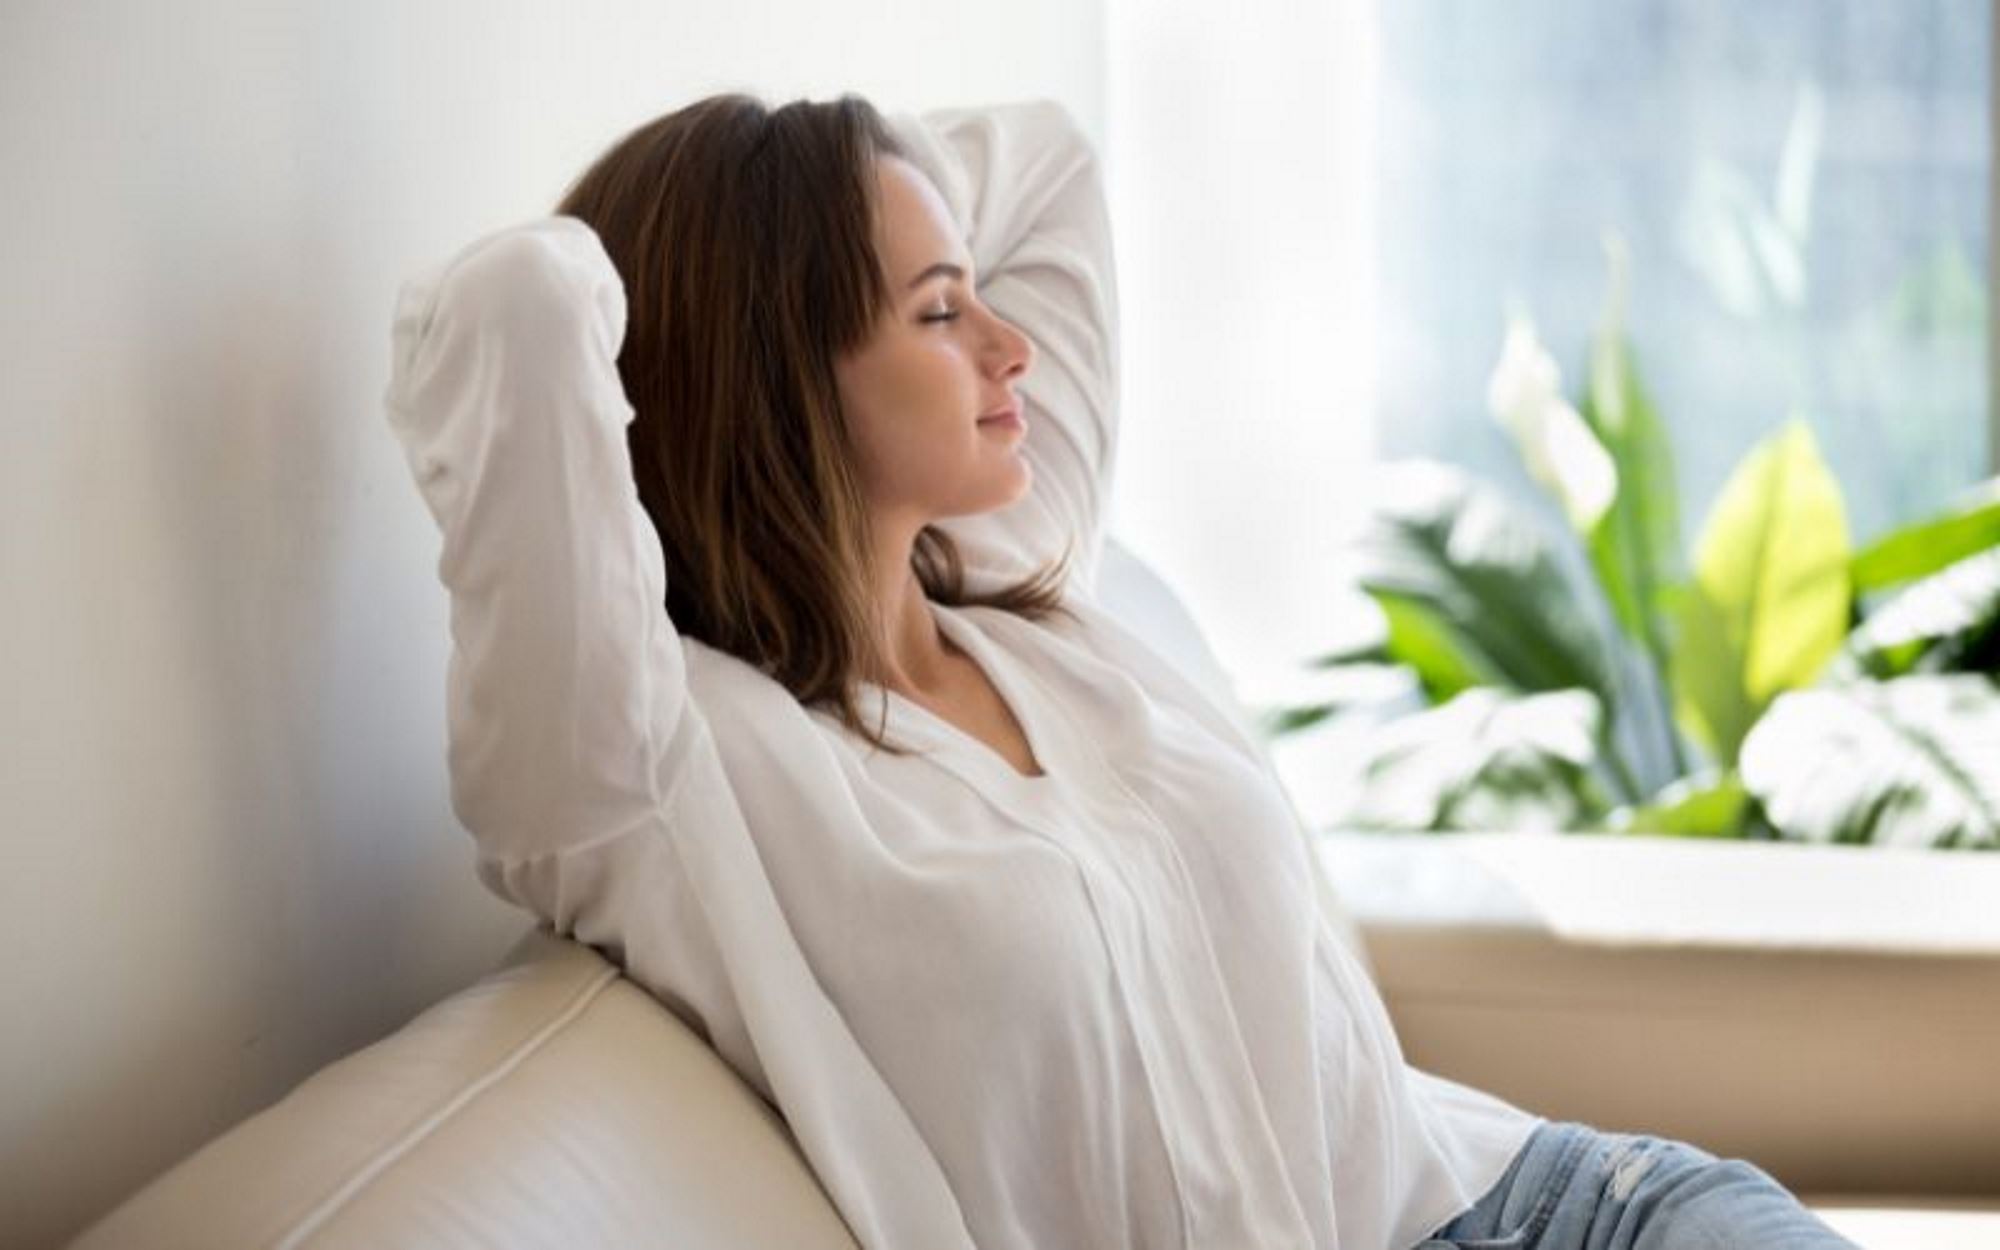 Woman in her house relaxing and breathing in clean air.